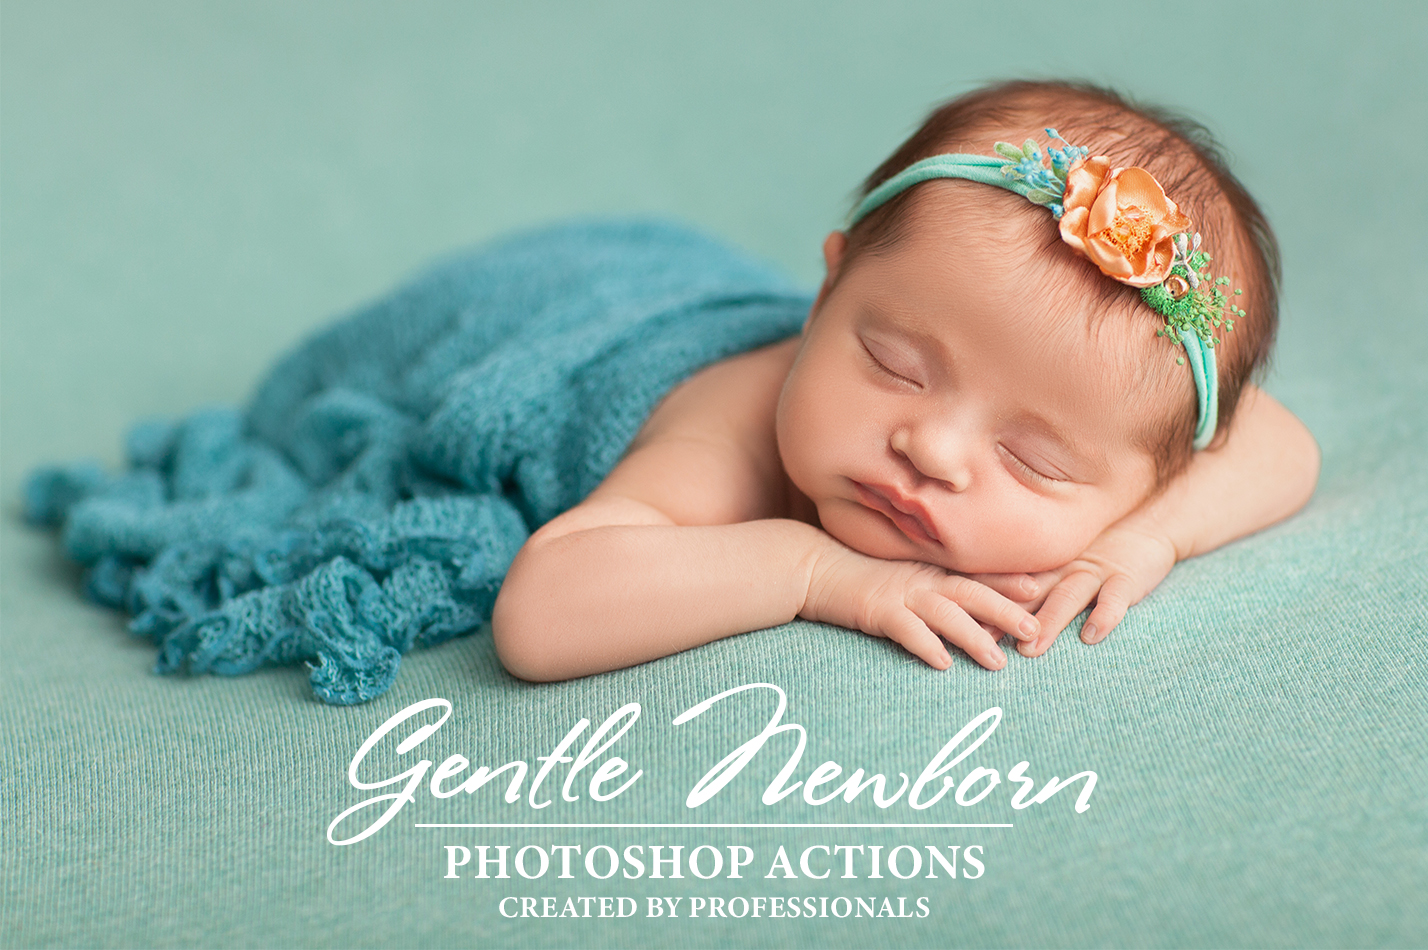 6 Newborn Photoshop Actions Free|Newborn Actions for Photoshop Free